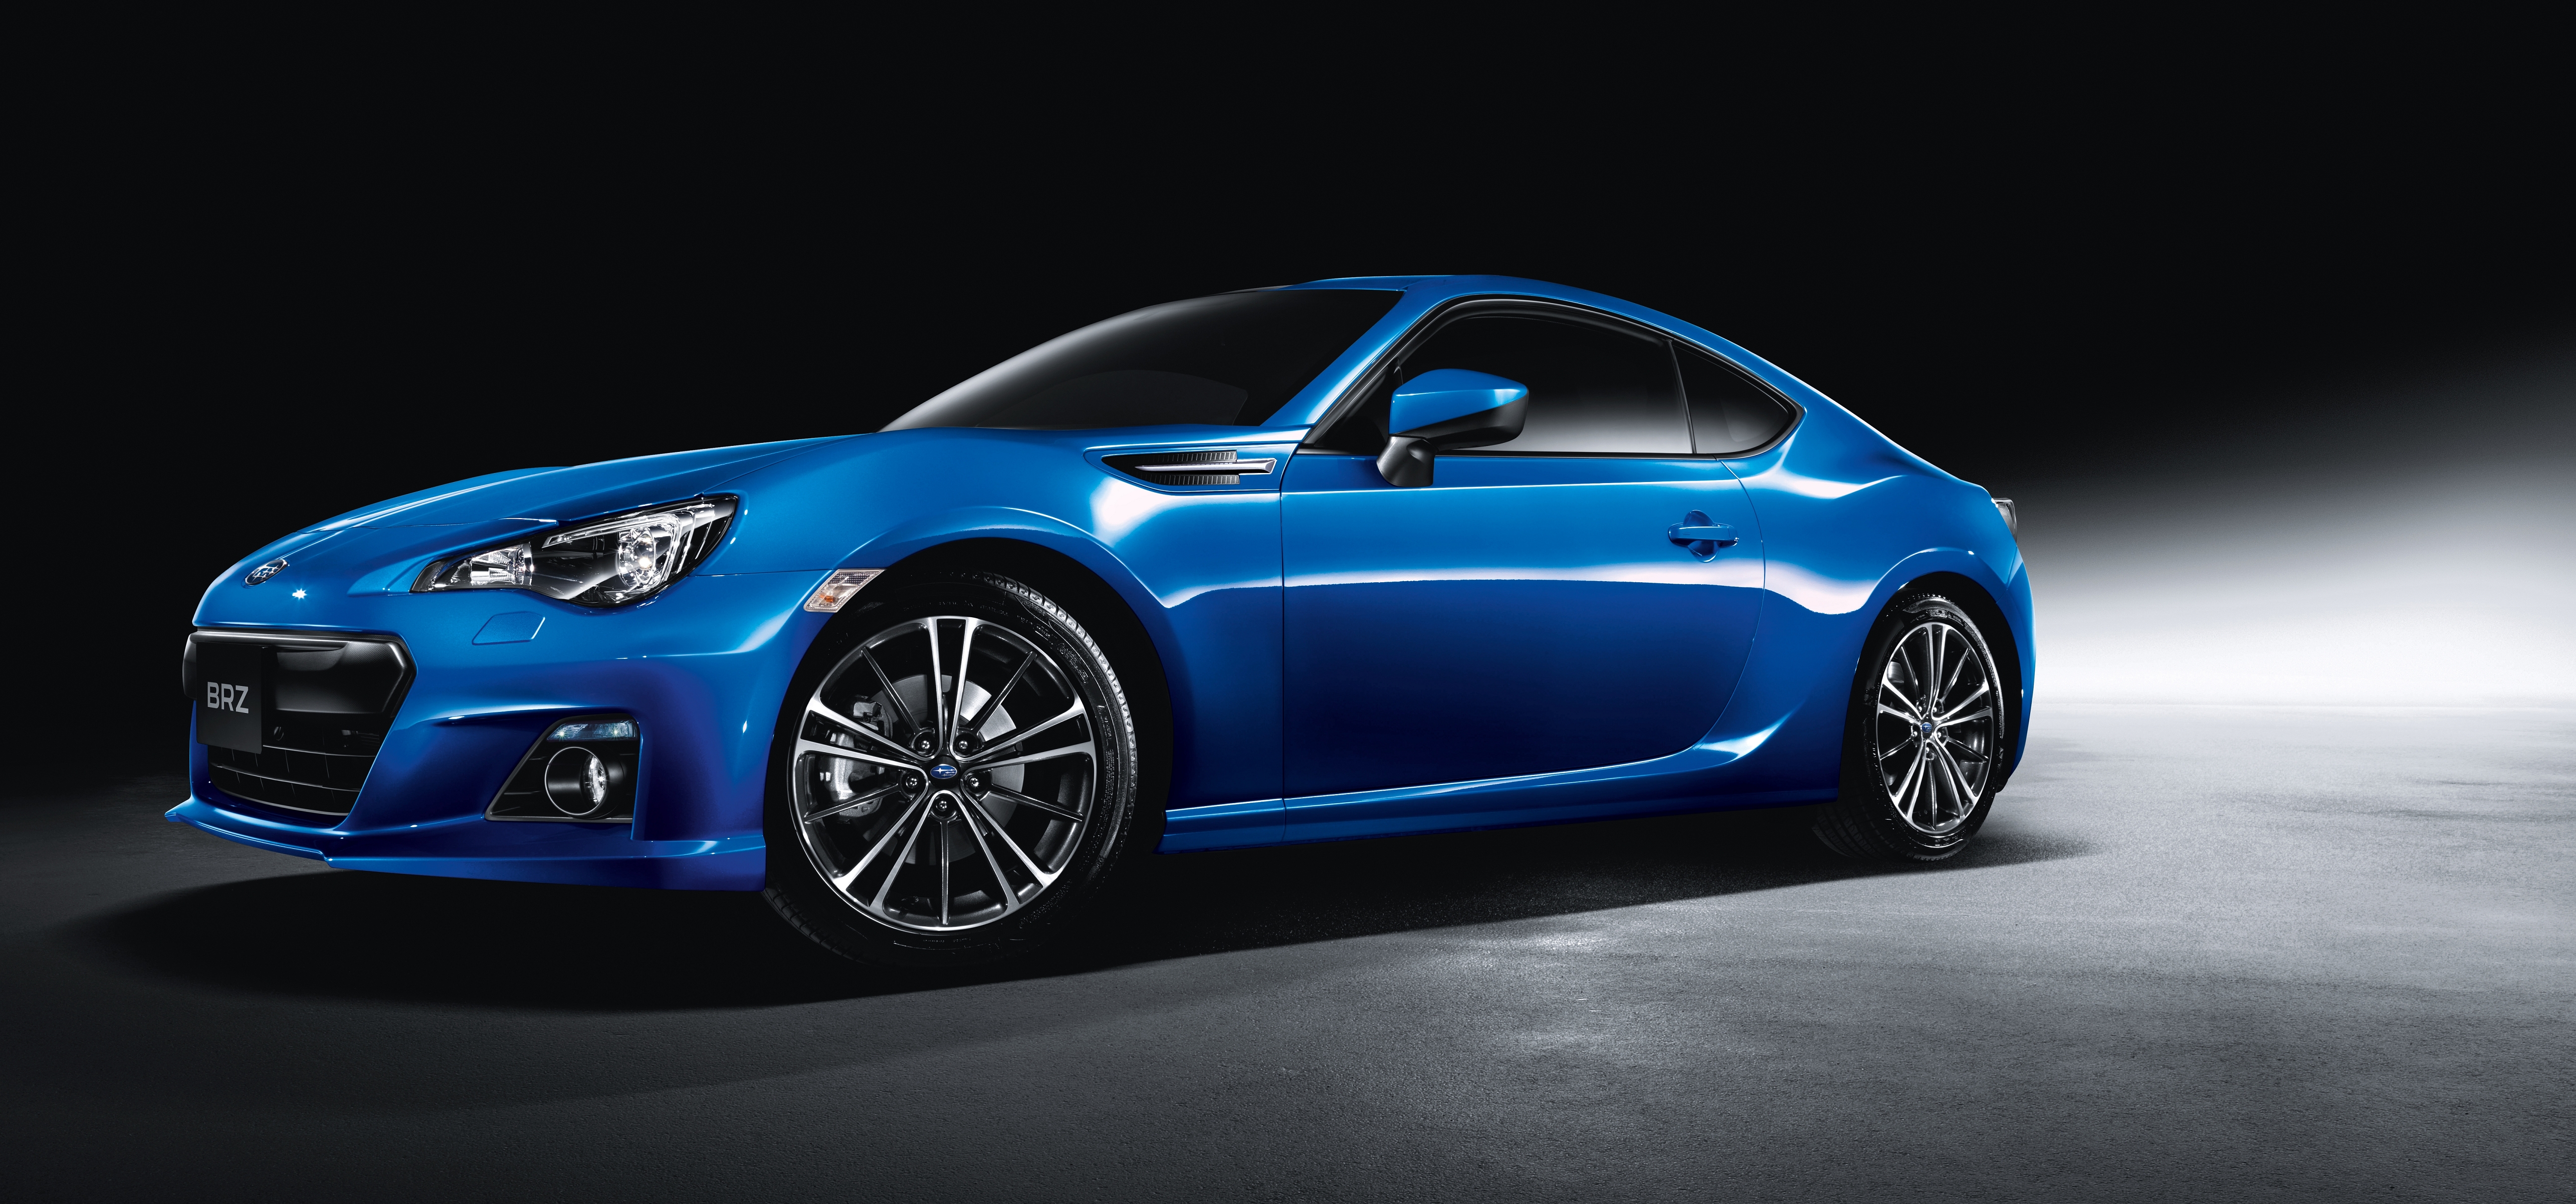 Subaru Australia sells out of BRZ in one day, All sold online